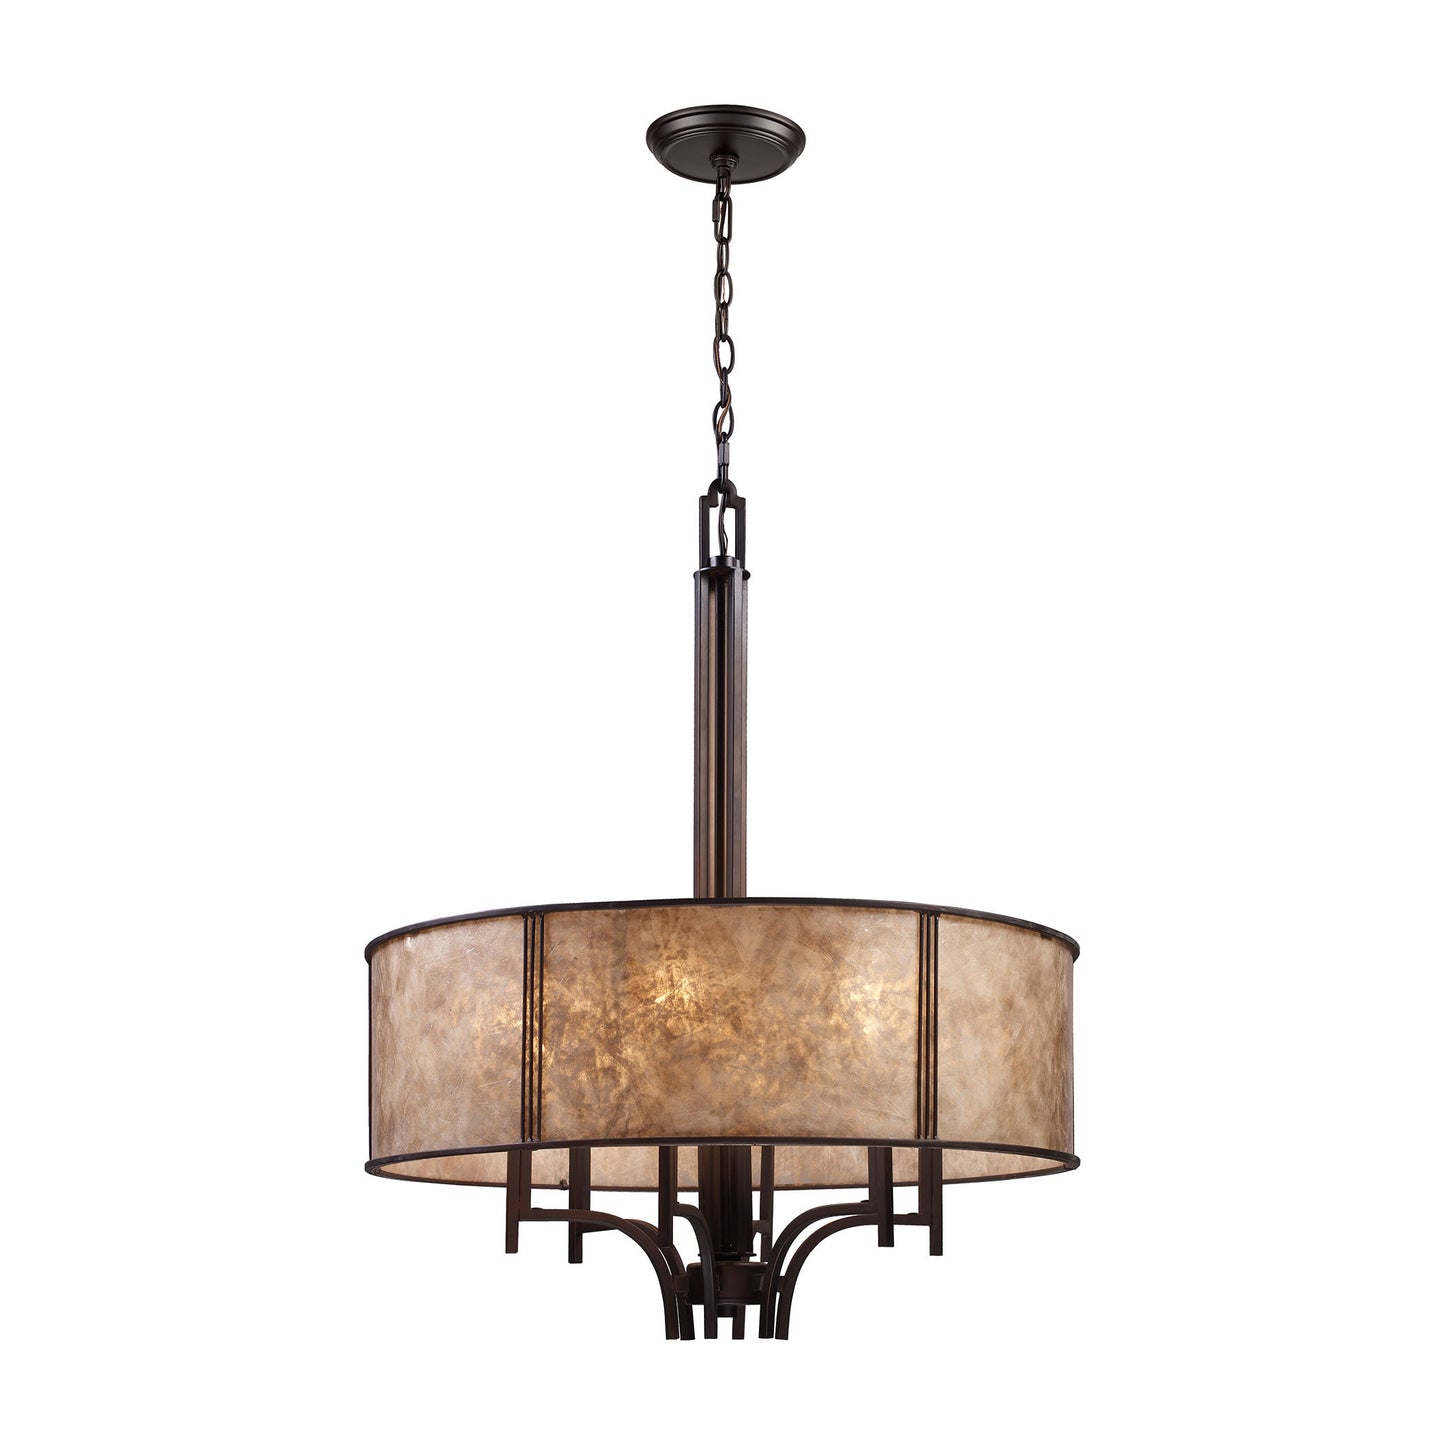 Barringer 6-Light Chandelier in Aged Bronze with Tan Mica Shade